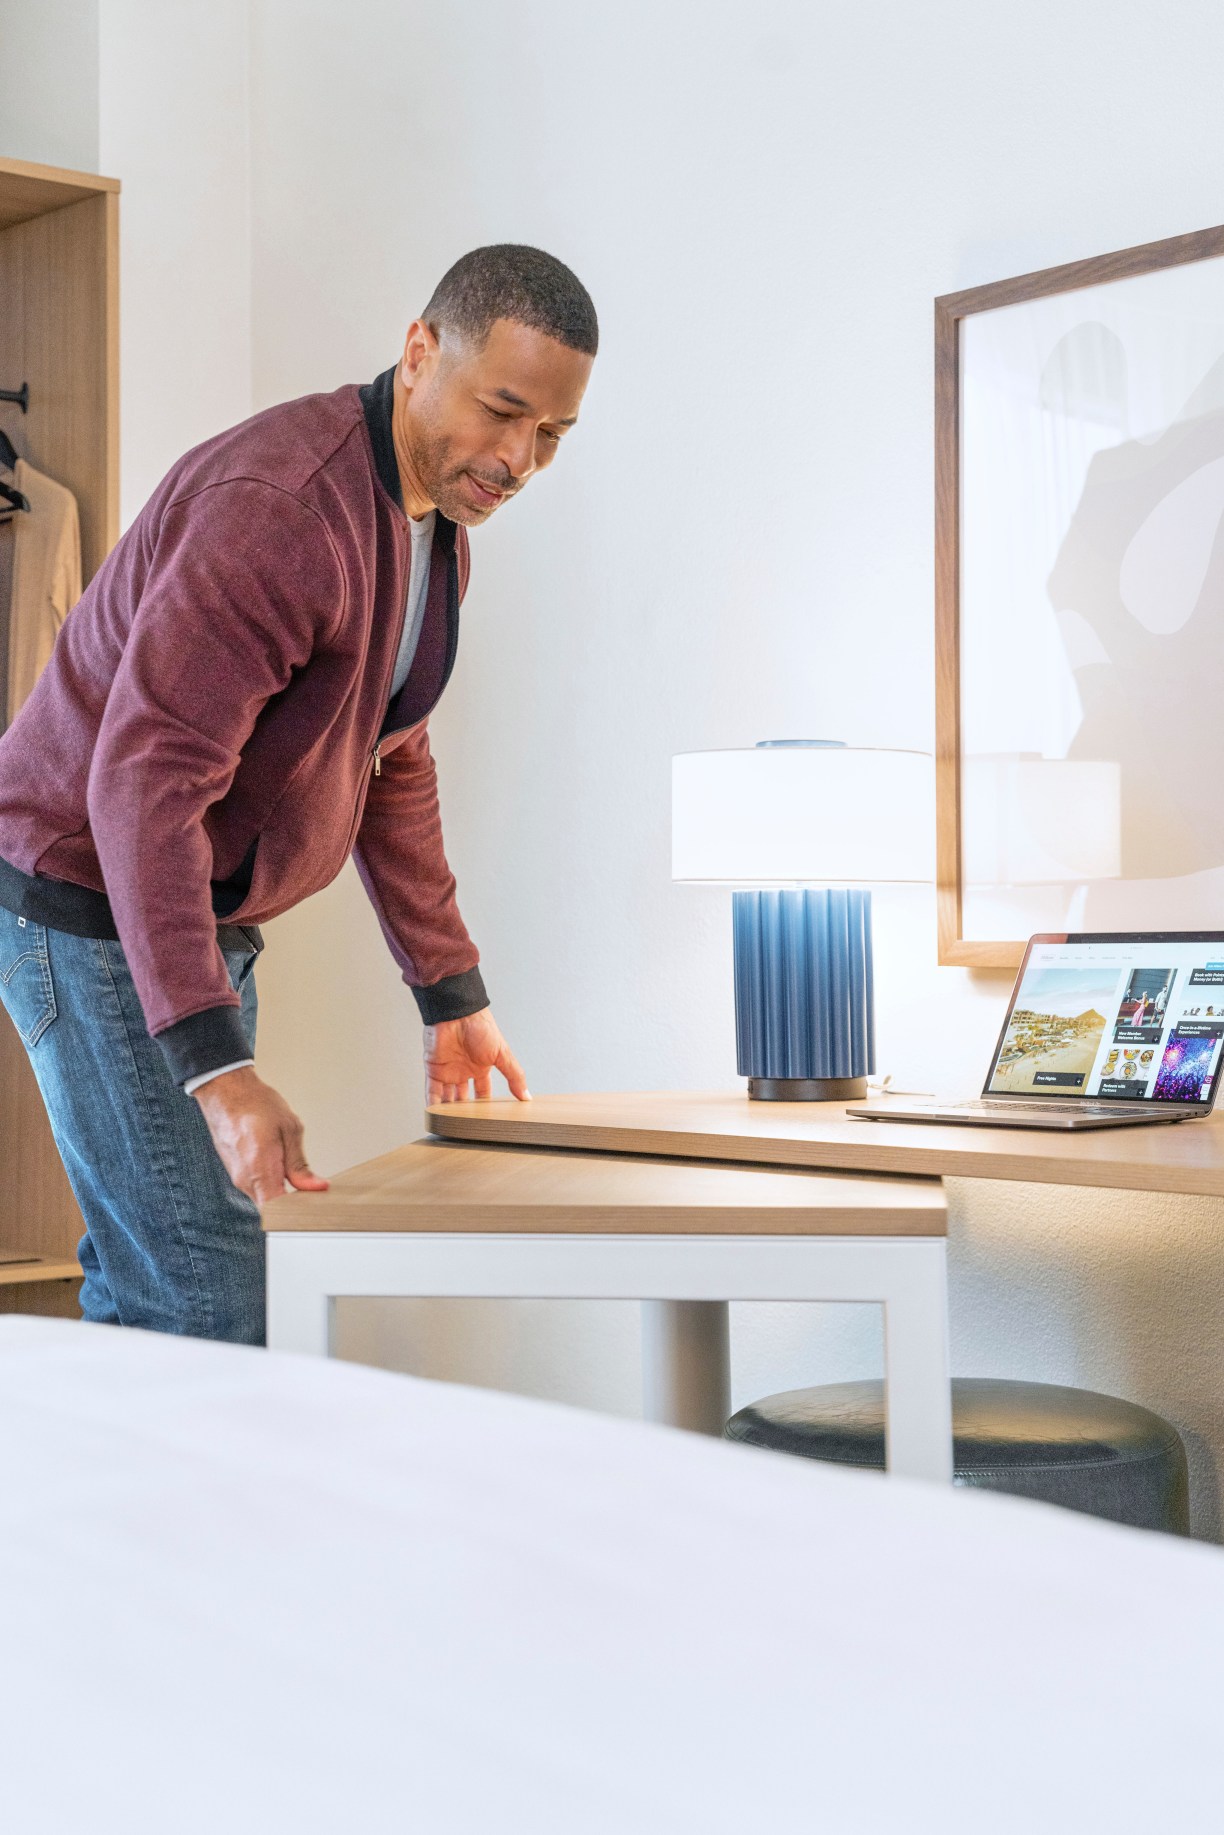 man moves adjustable table in guest room at Spark by Hilton a new hotel brand